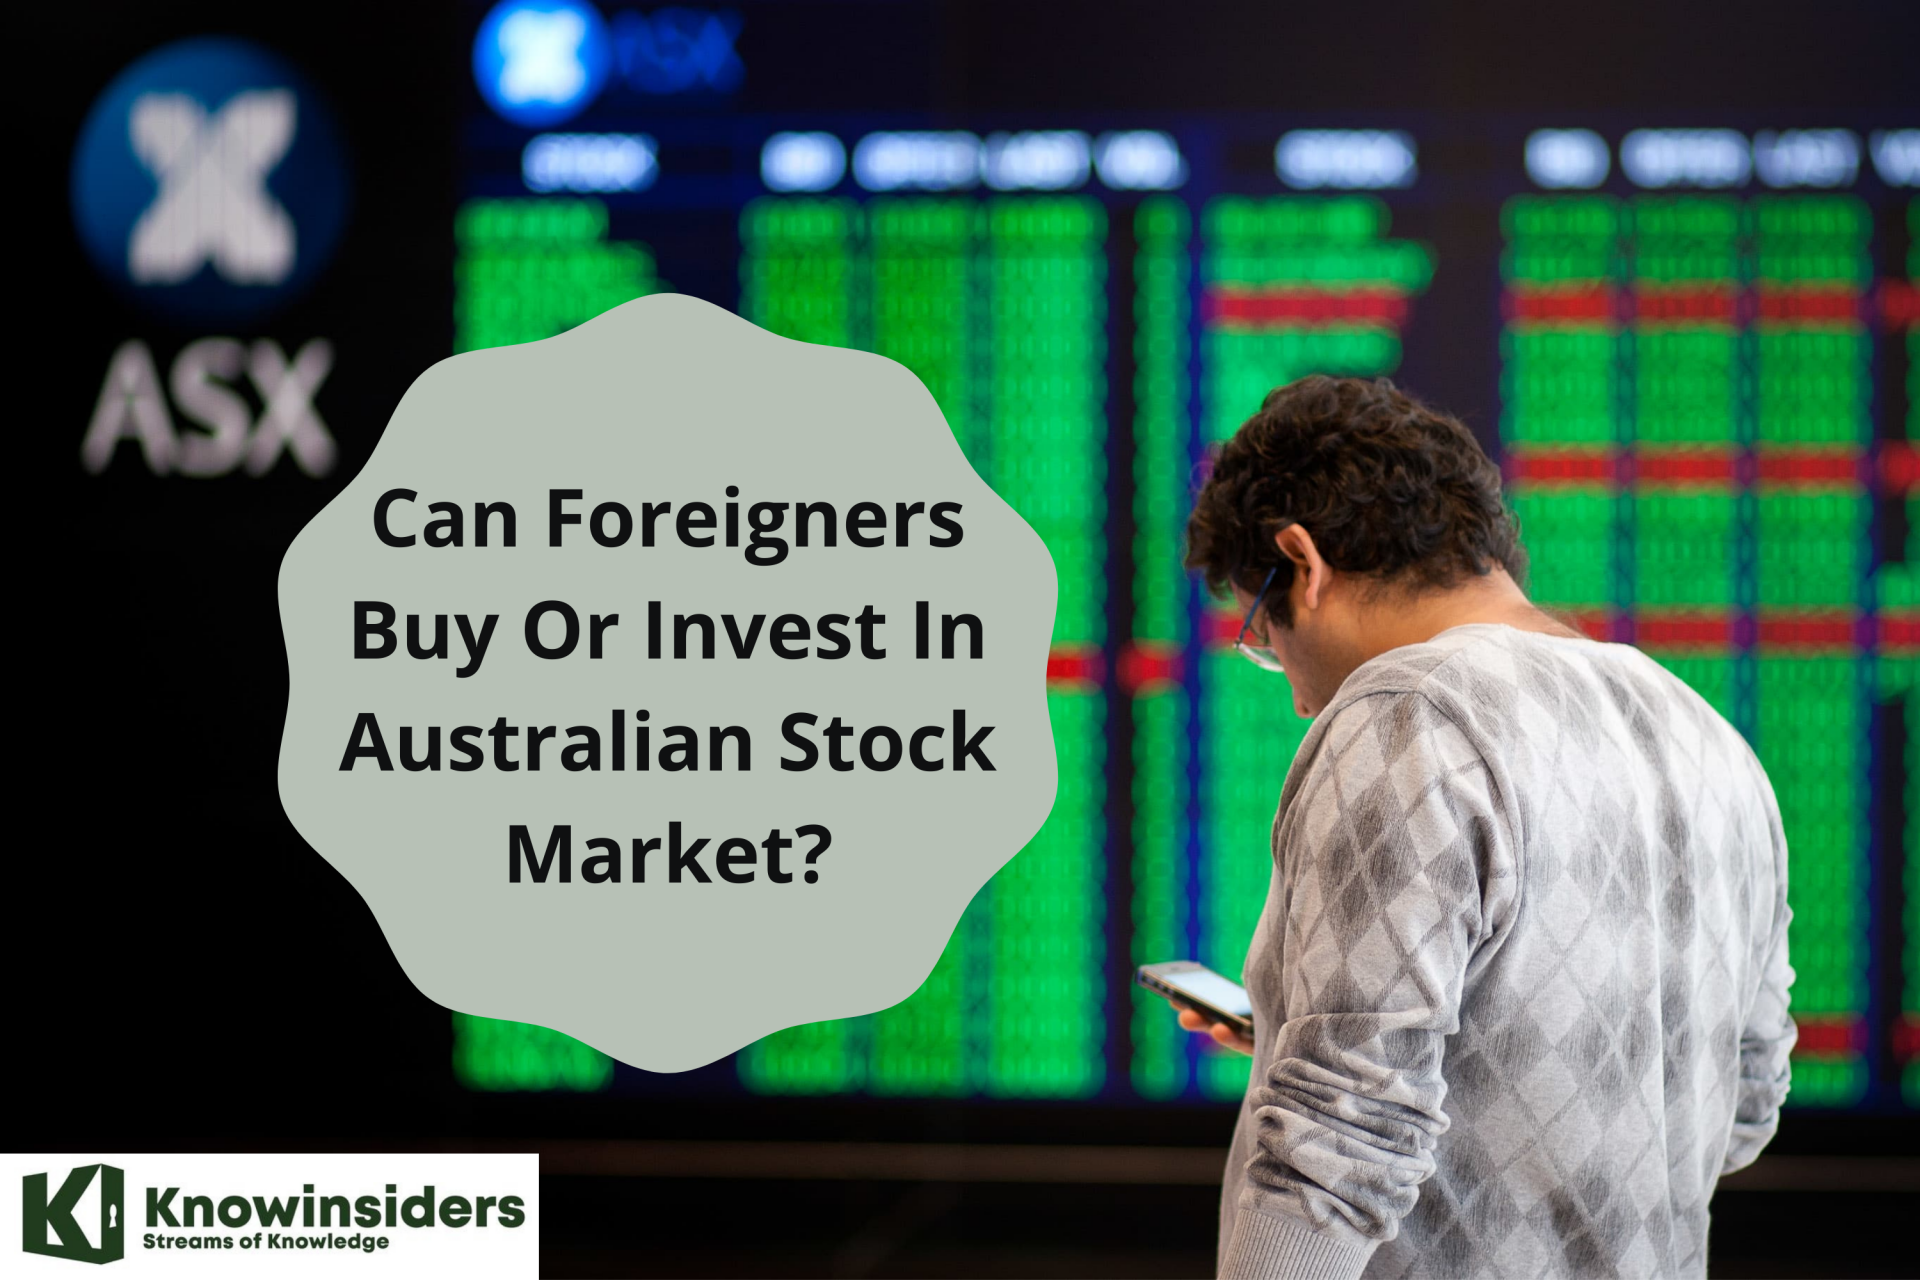 Can Foreigners Buy Or Invest In Australia Stock Market?